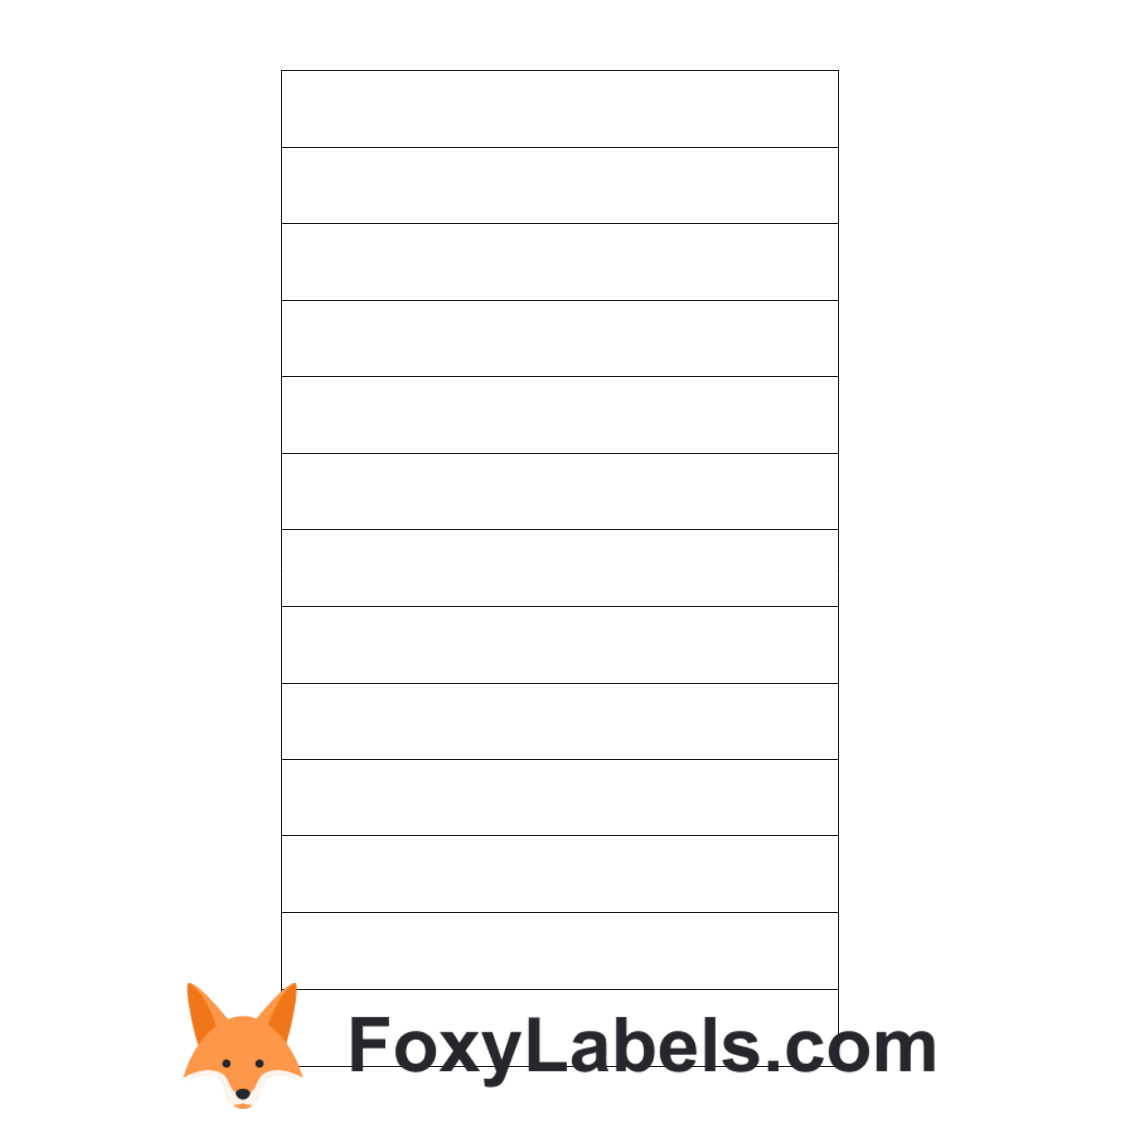 Avery-Zweckform L4746 label template for Google Docs